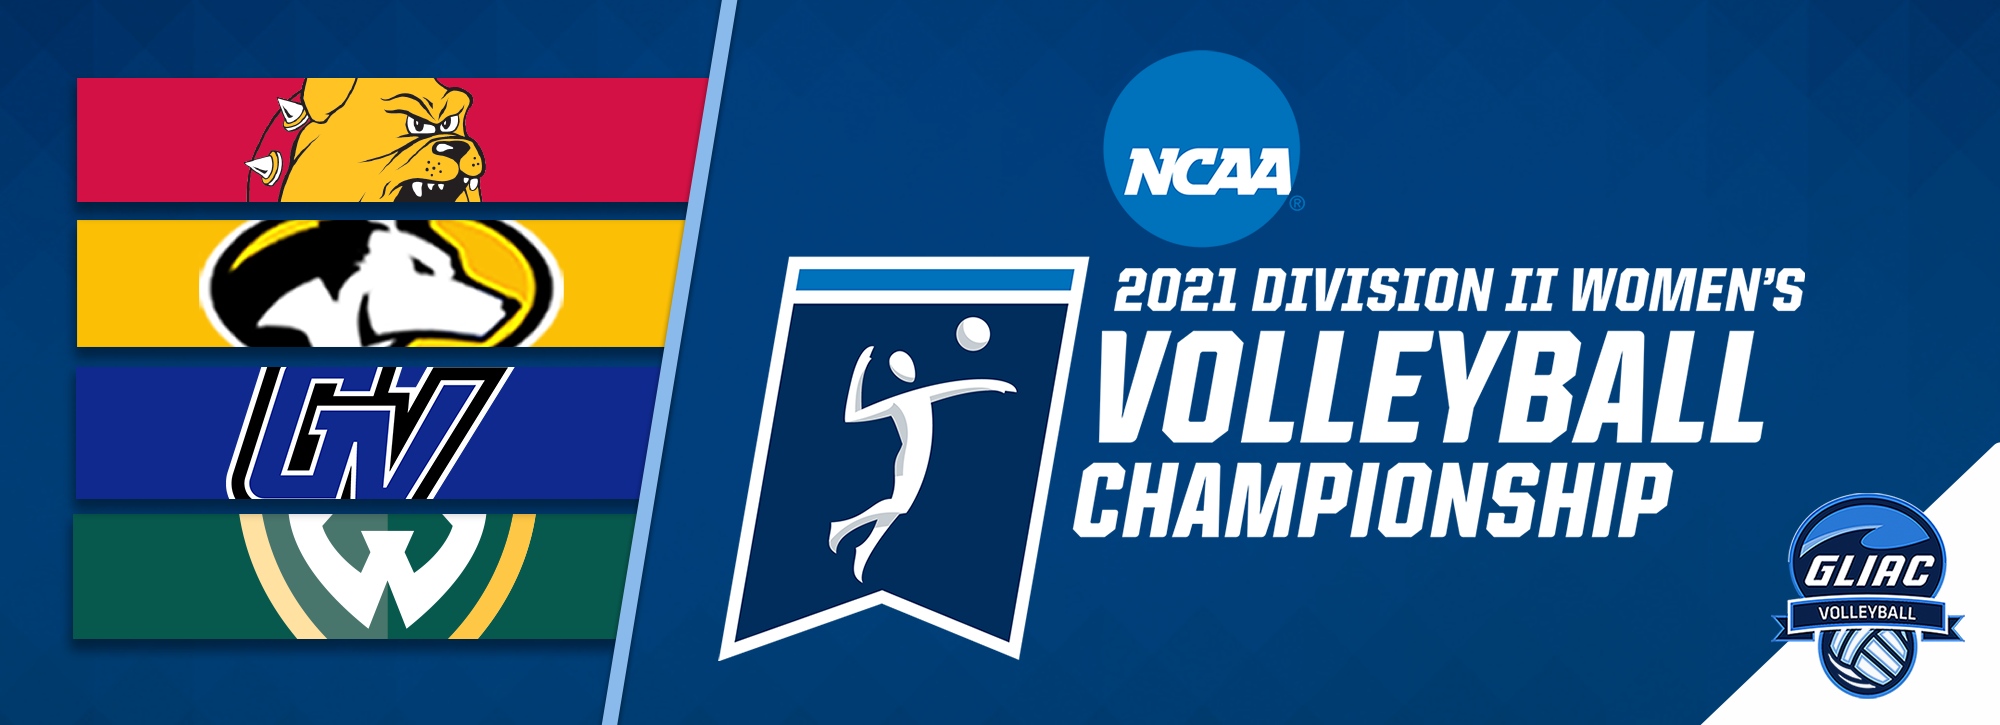 Four GLIAC teams receive bids to NCAA Division II Volleyball Championship